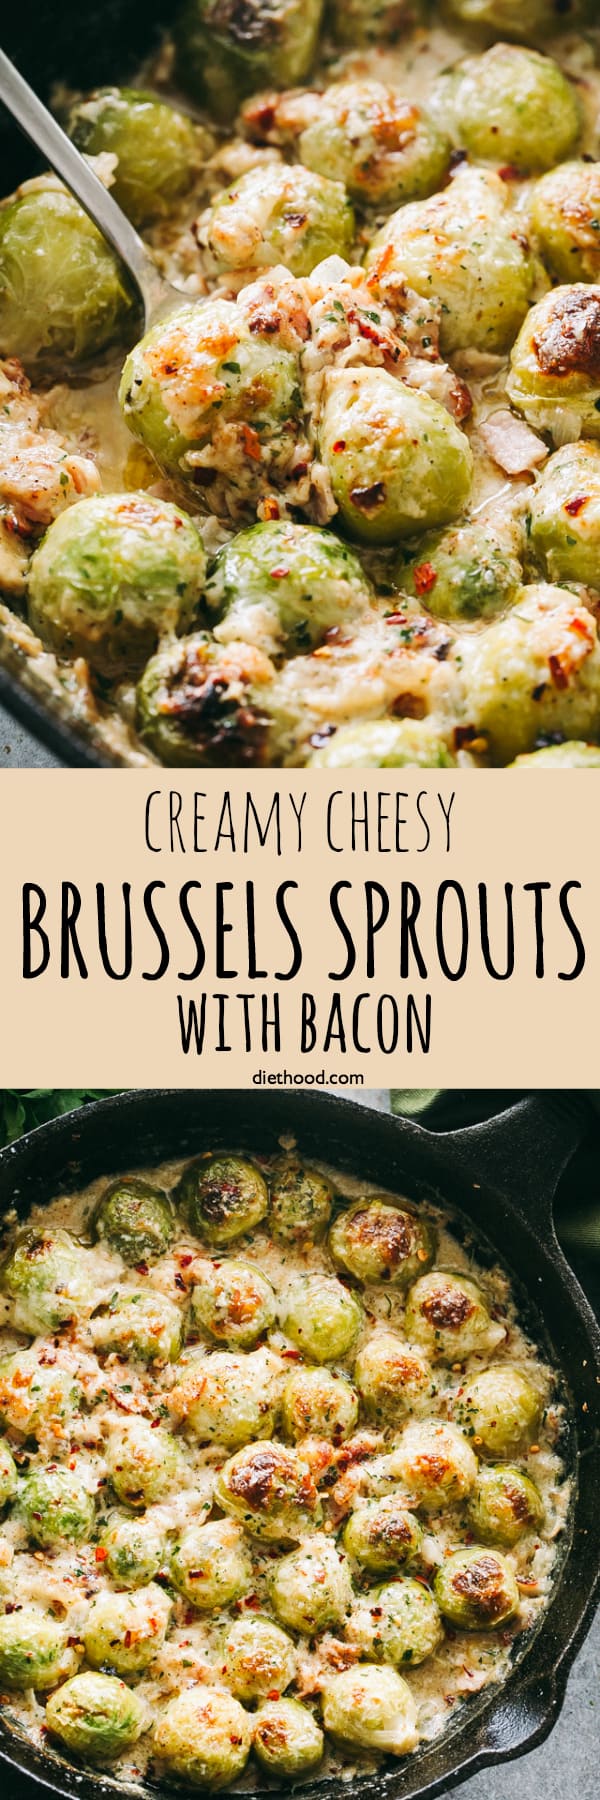 Creamy Cheesy Brussels Sprouts with Bacon | Diethood